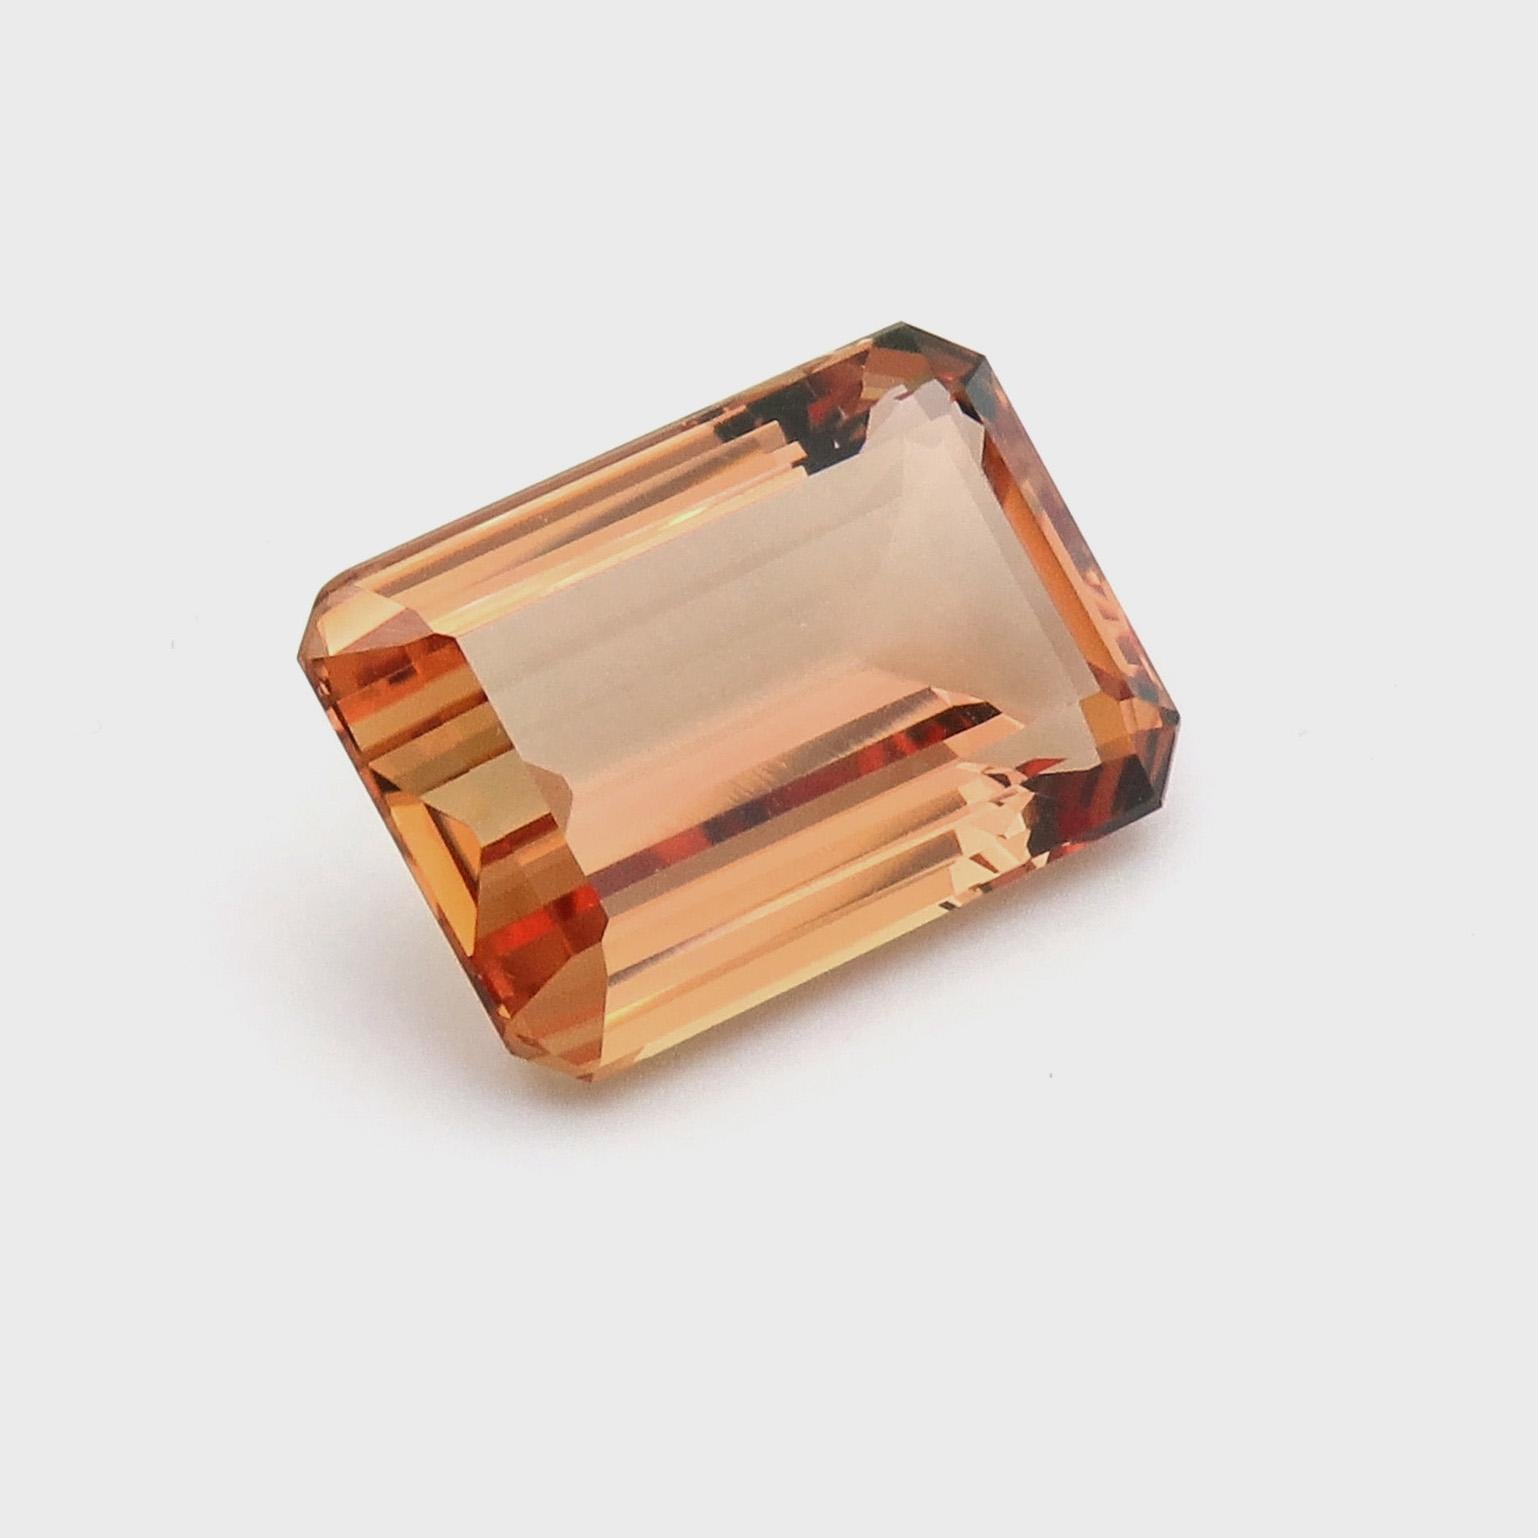 28.37ct Imperial precious Topaz. This GIA certified natural gemstone is unique in its color, orange/pink and is one of the most desirable precious topaz colors. Orange is the main color with a rare pink overtone.  From our research, this may be the